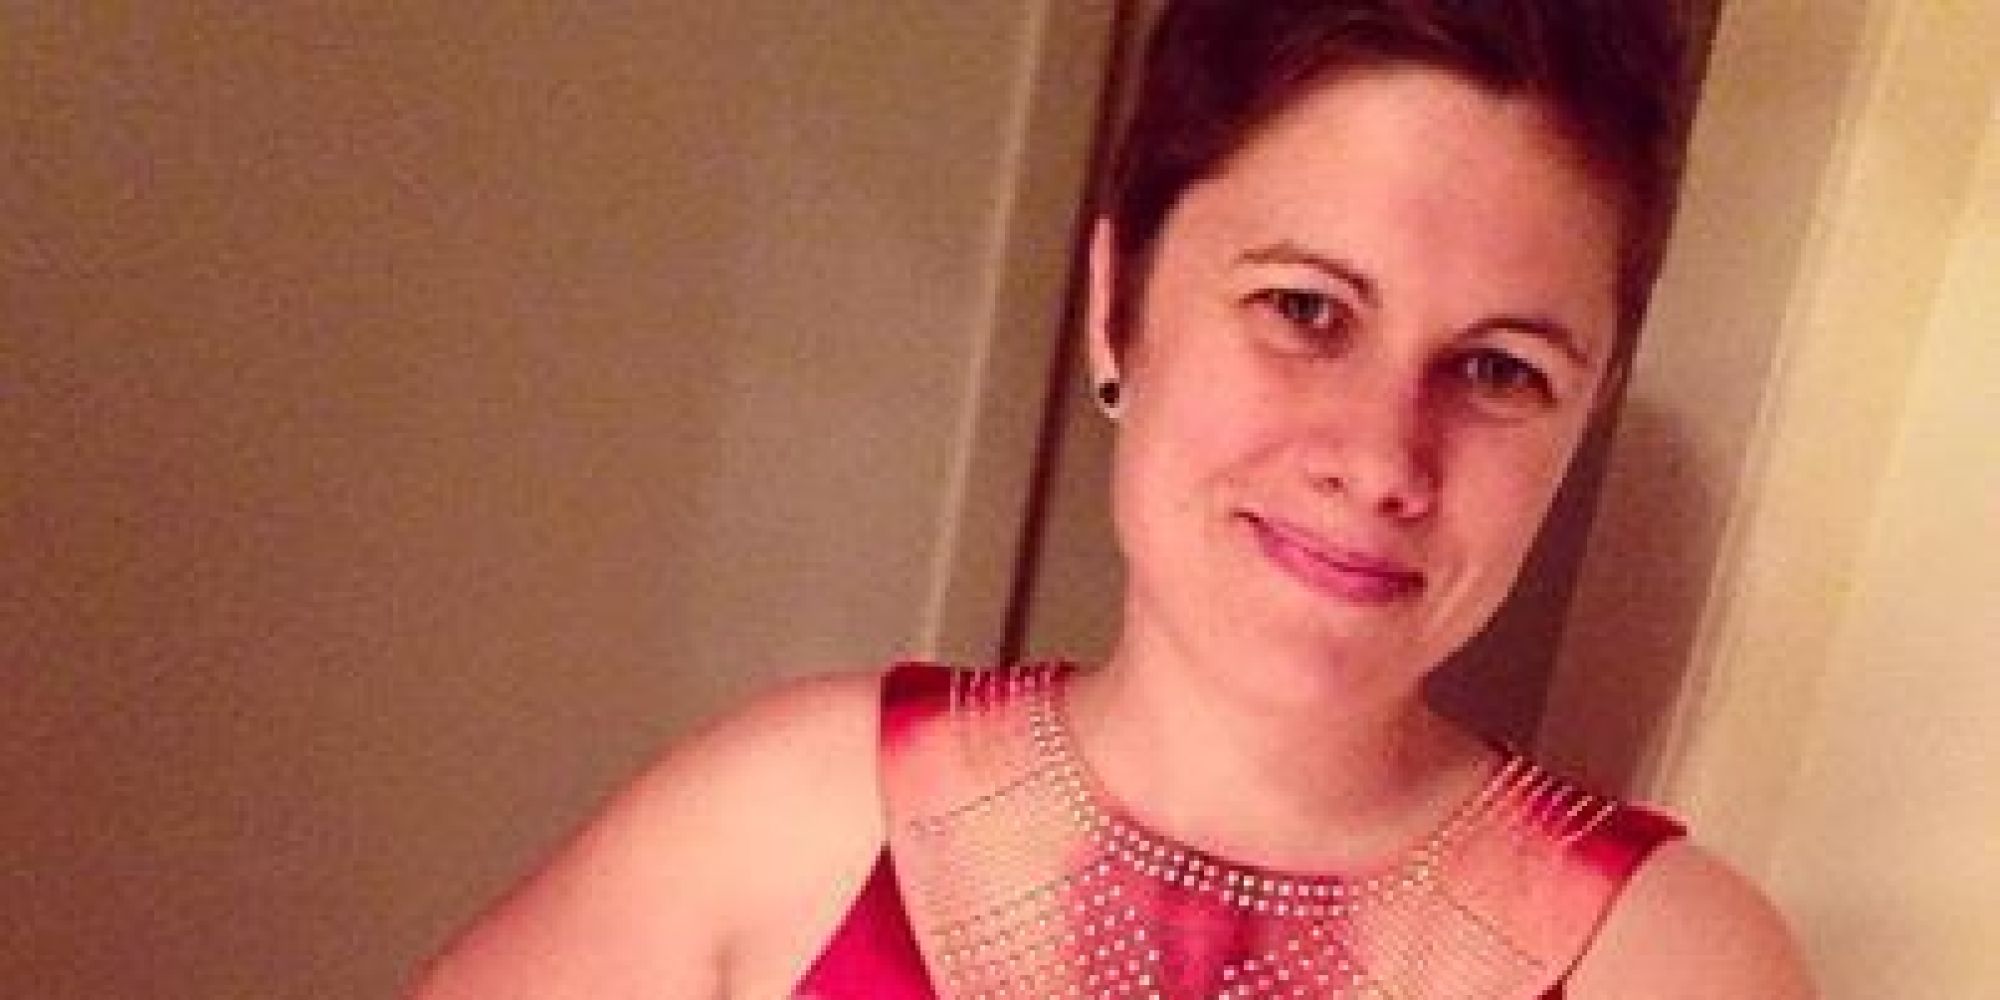 Woman Unwittingly Buys 'Vagina Dress' With 'Vajazzled Neckline